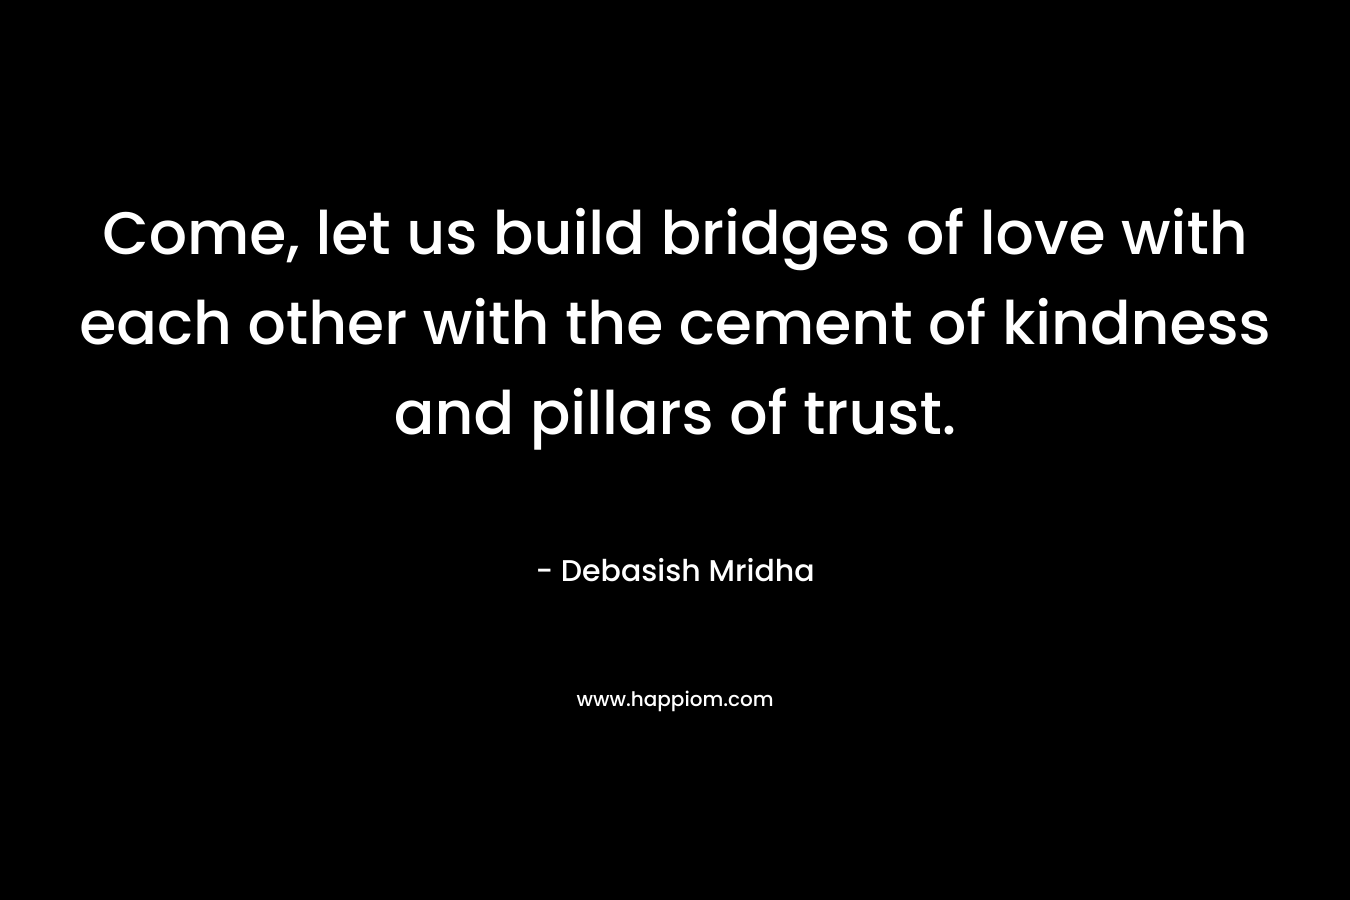 Come, let us build bridges of love with each other with the cement of kindness and pillars of trust. – Debasish Mridha